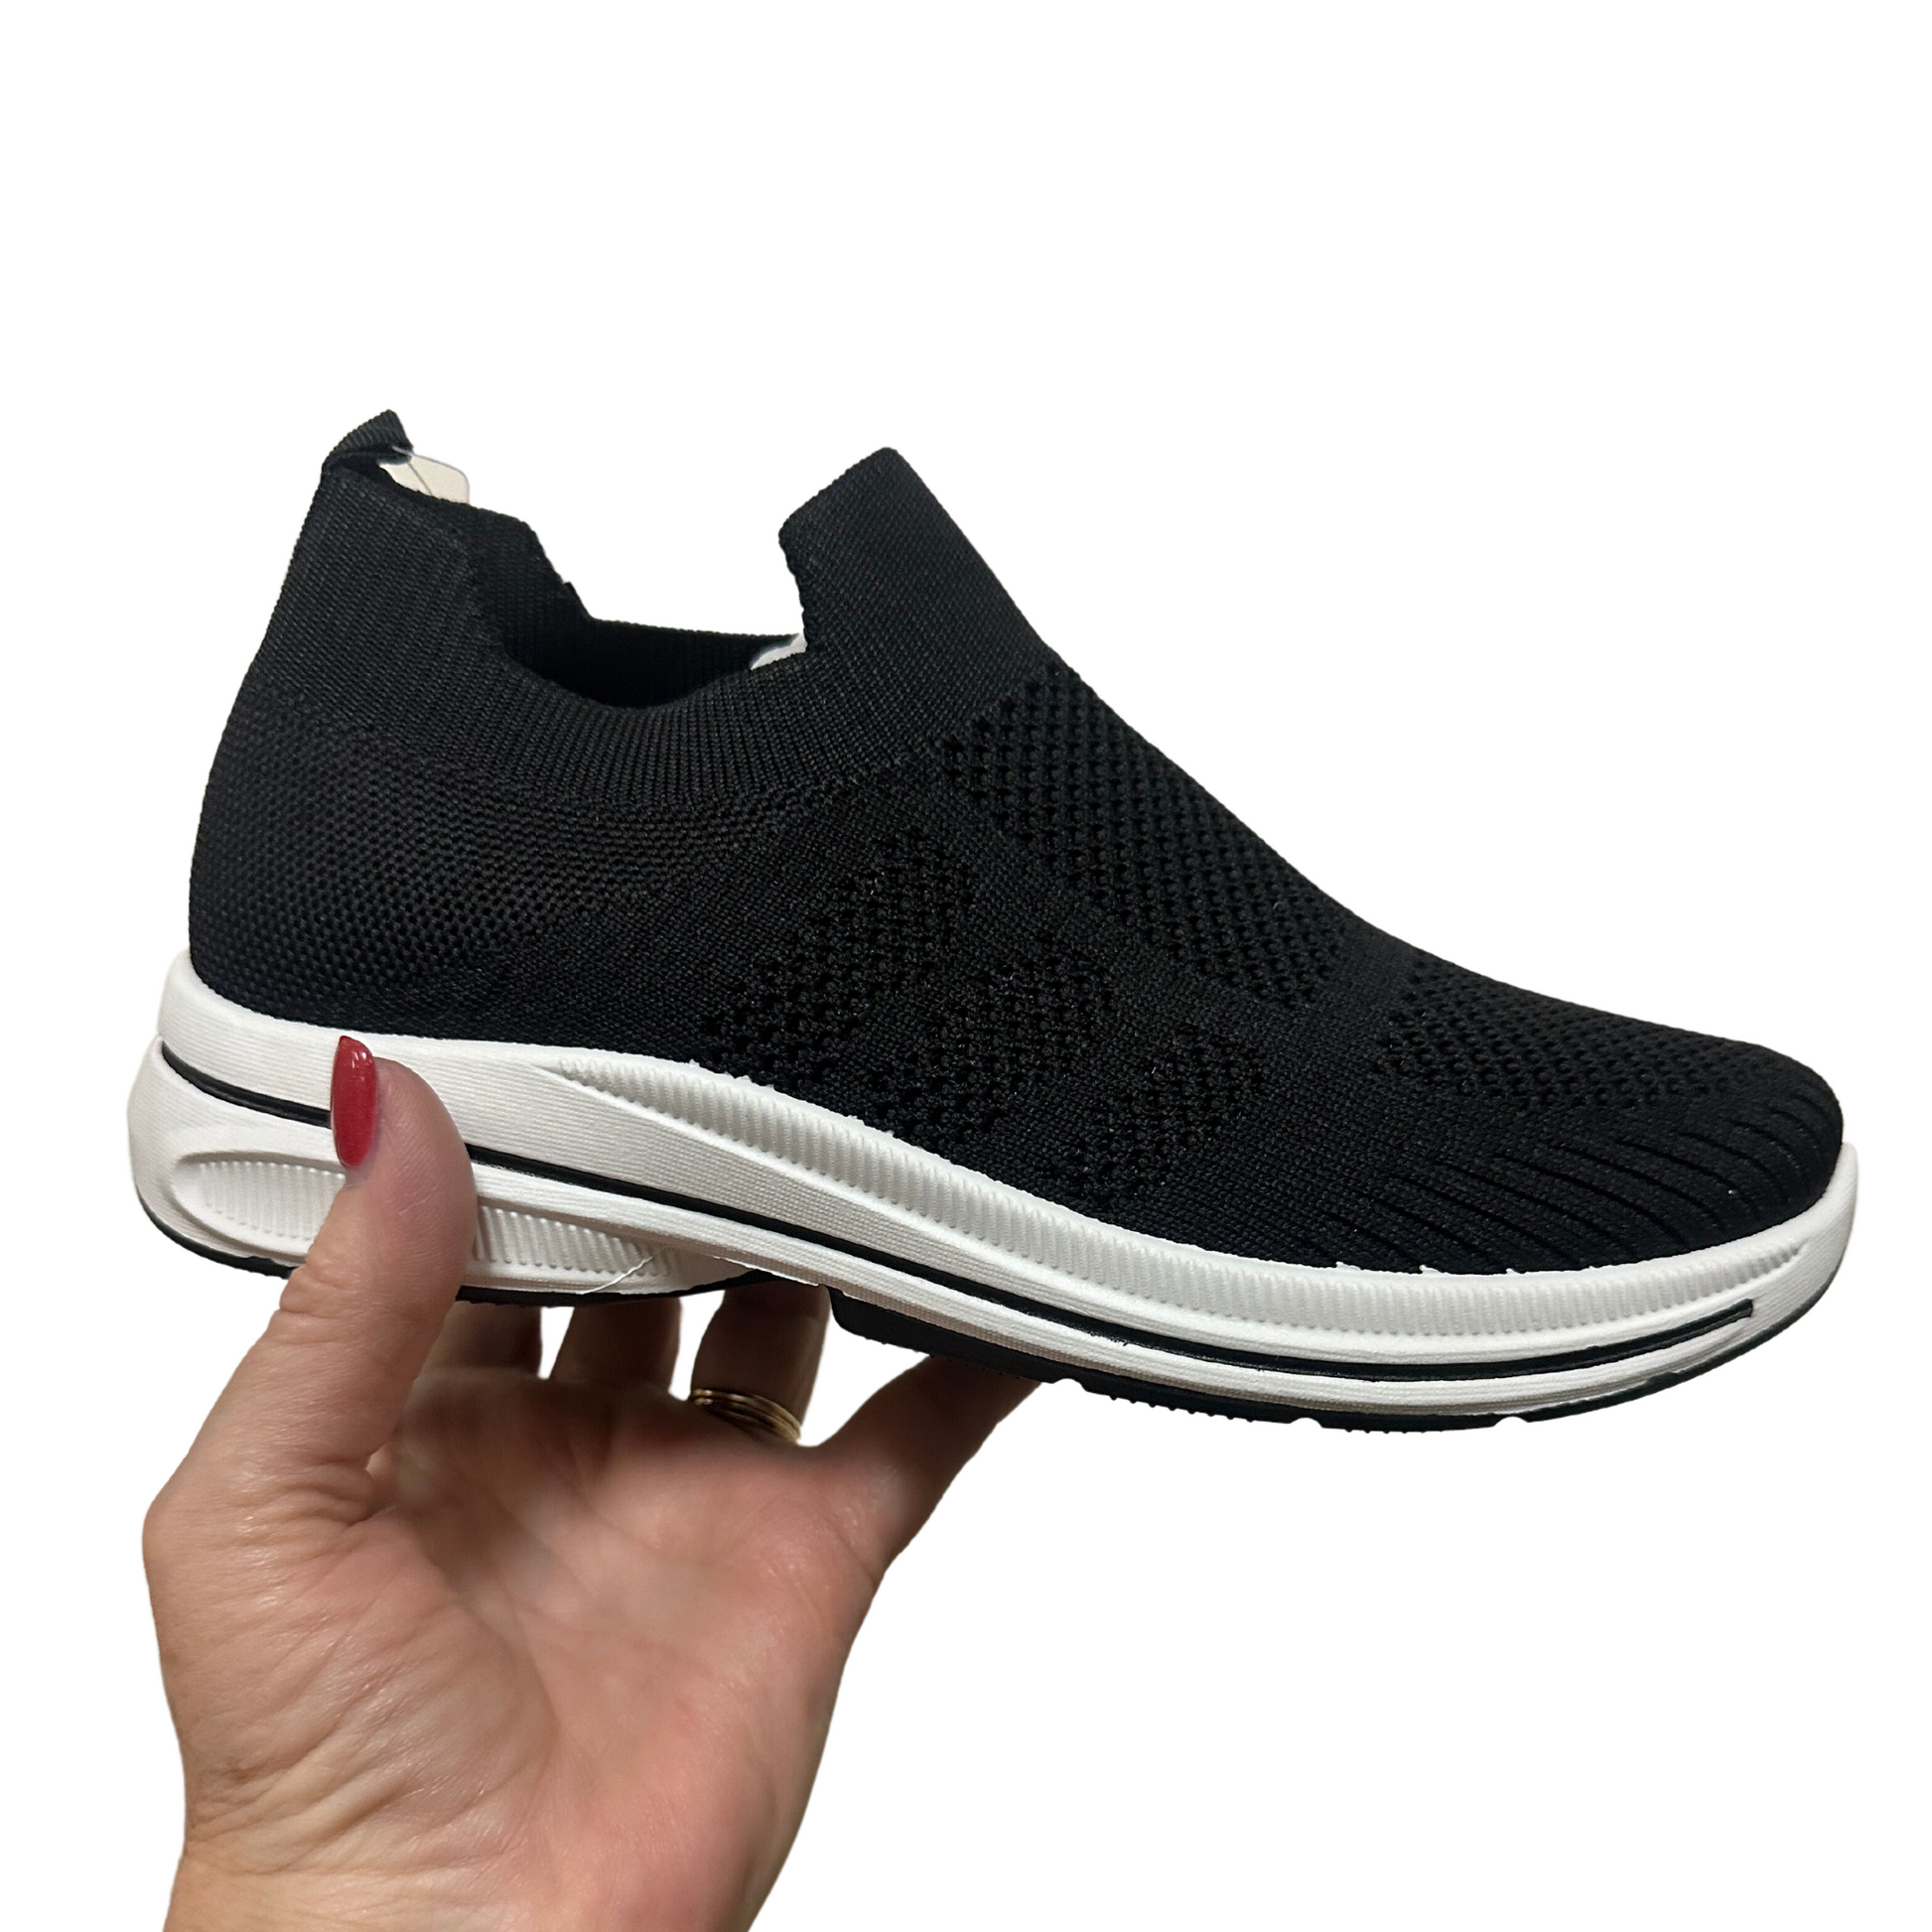 This pair of black sneakers is perfect for everyday wear. Its lightweight woven design ensures your feet stay comfortable all day long, and the slip-on feature means you can get ready in no time. Look stylish while staying comfortable!